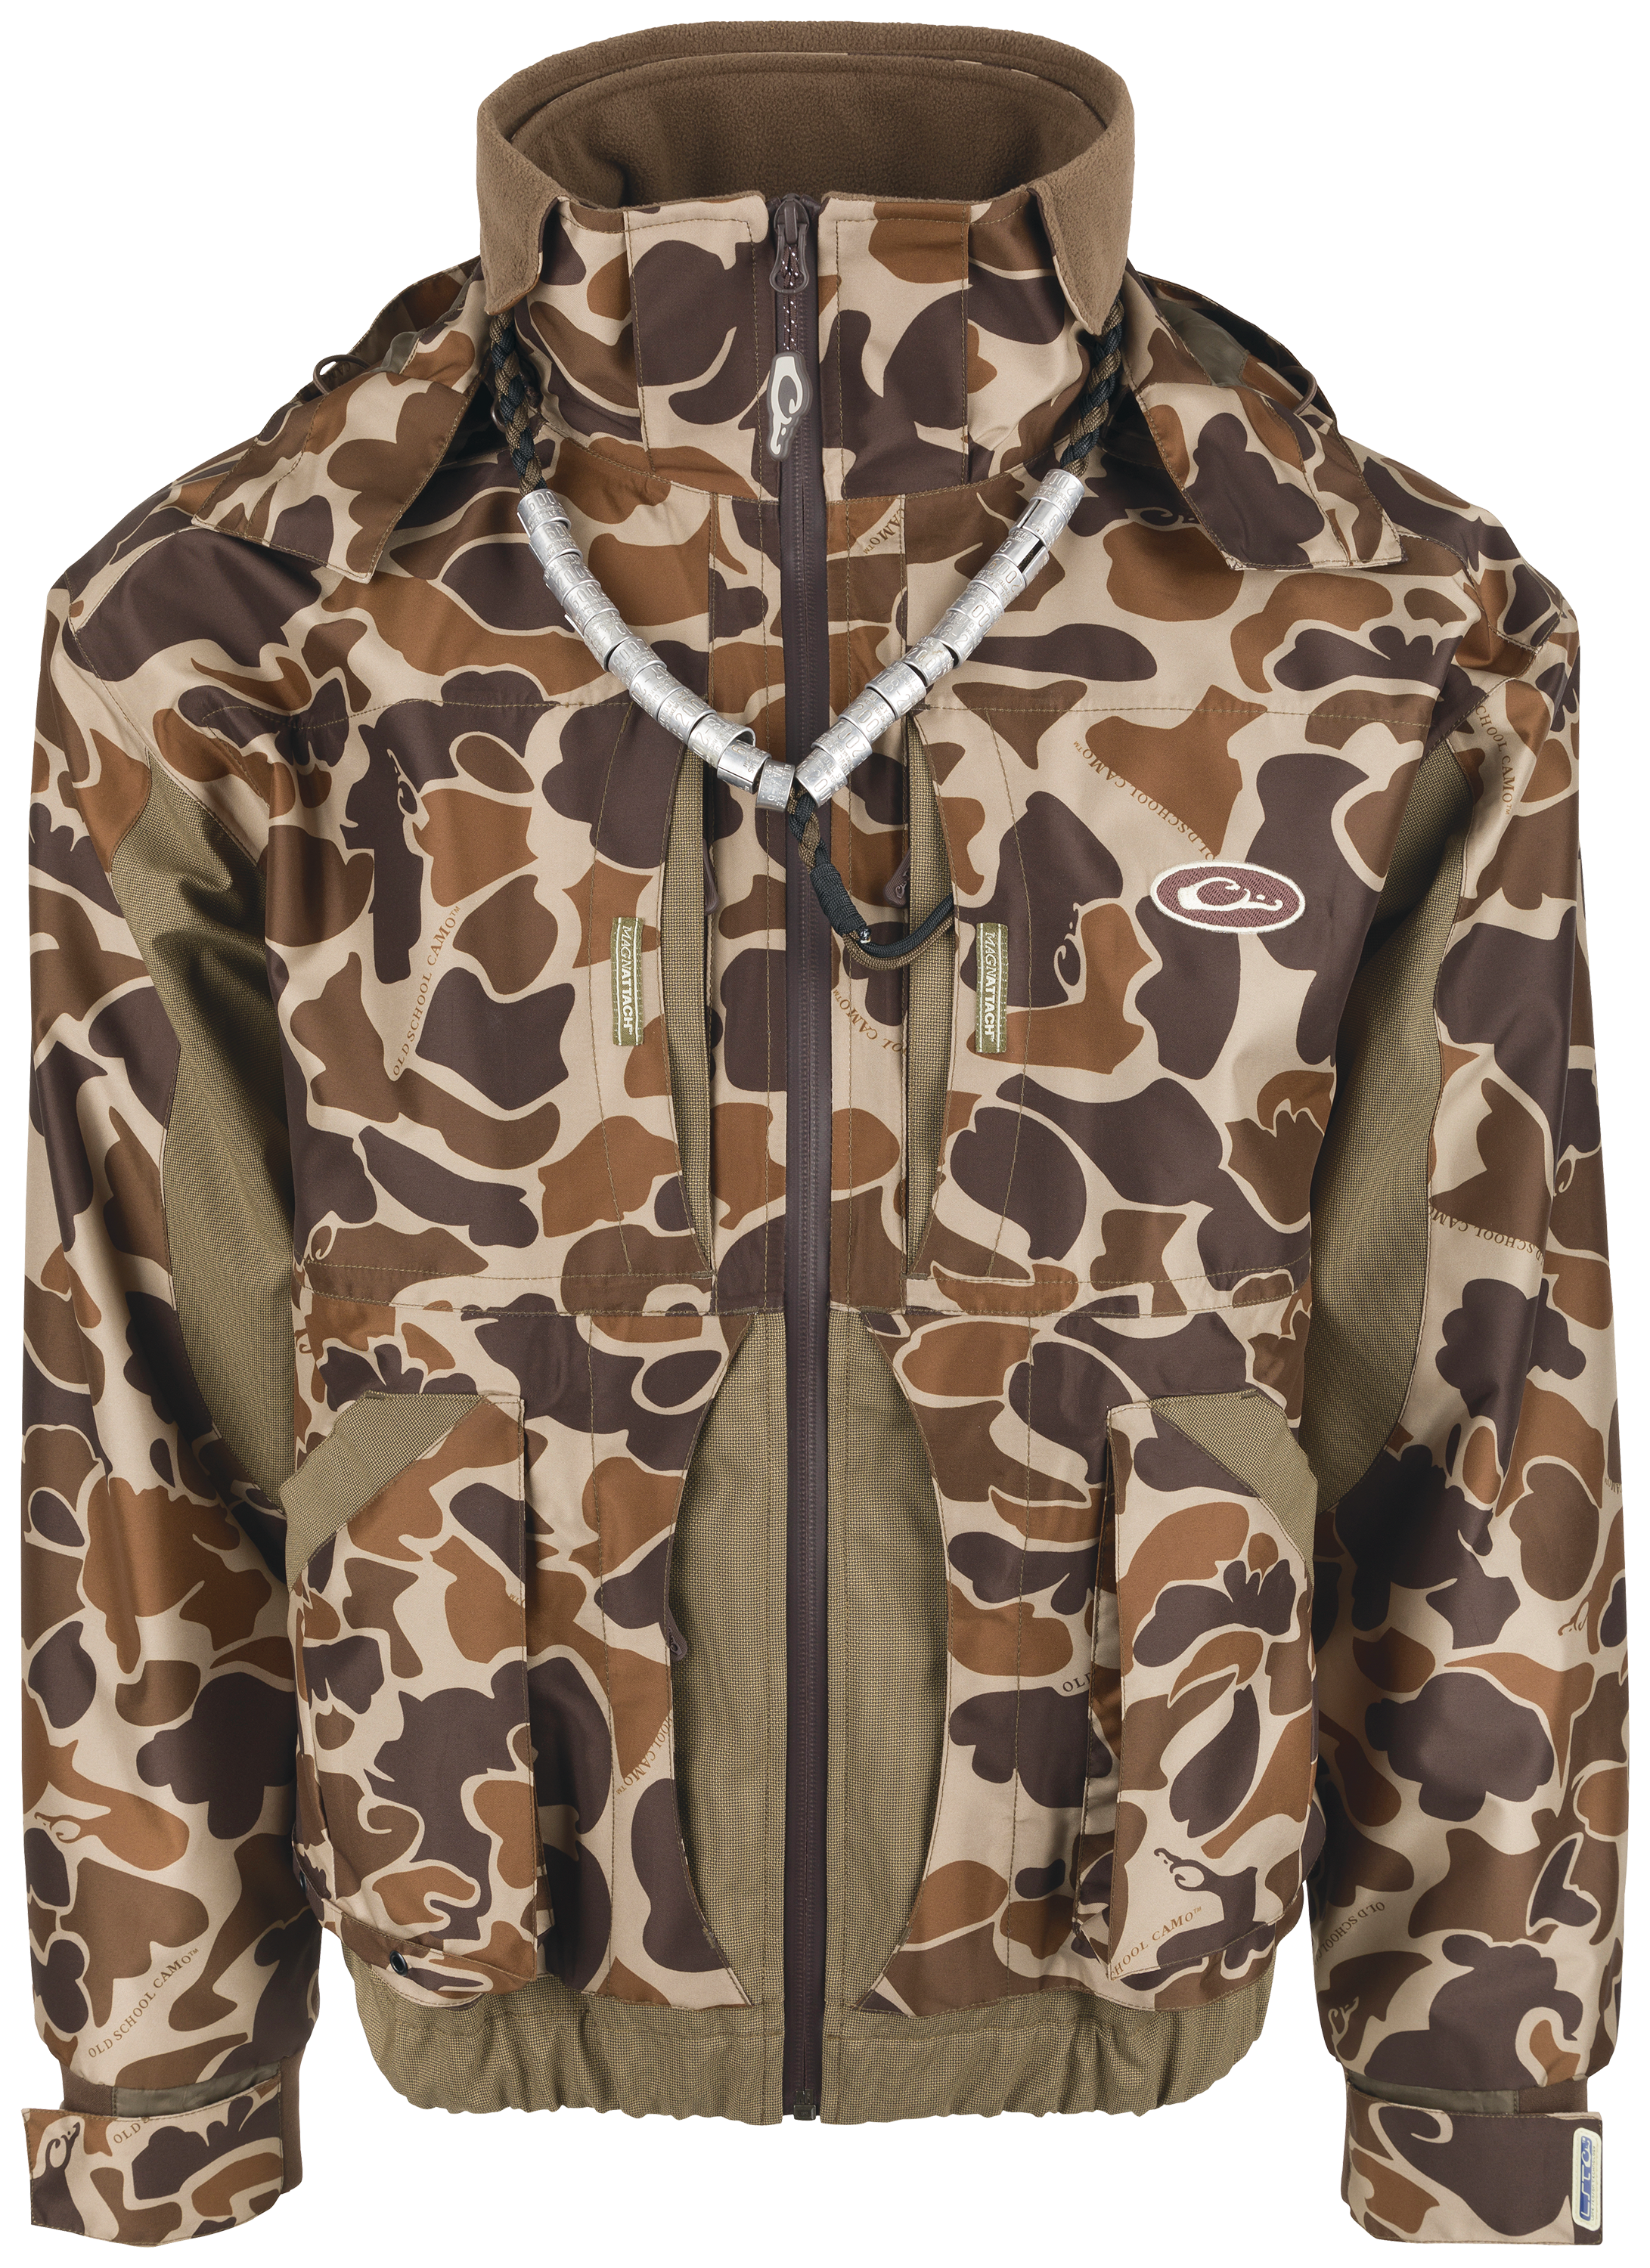 All in Motion Jacket Youth 6 multi - Duck Worth Wearing